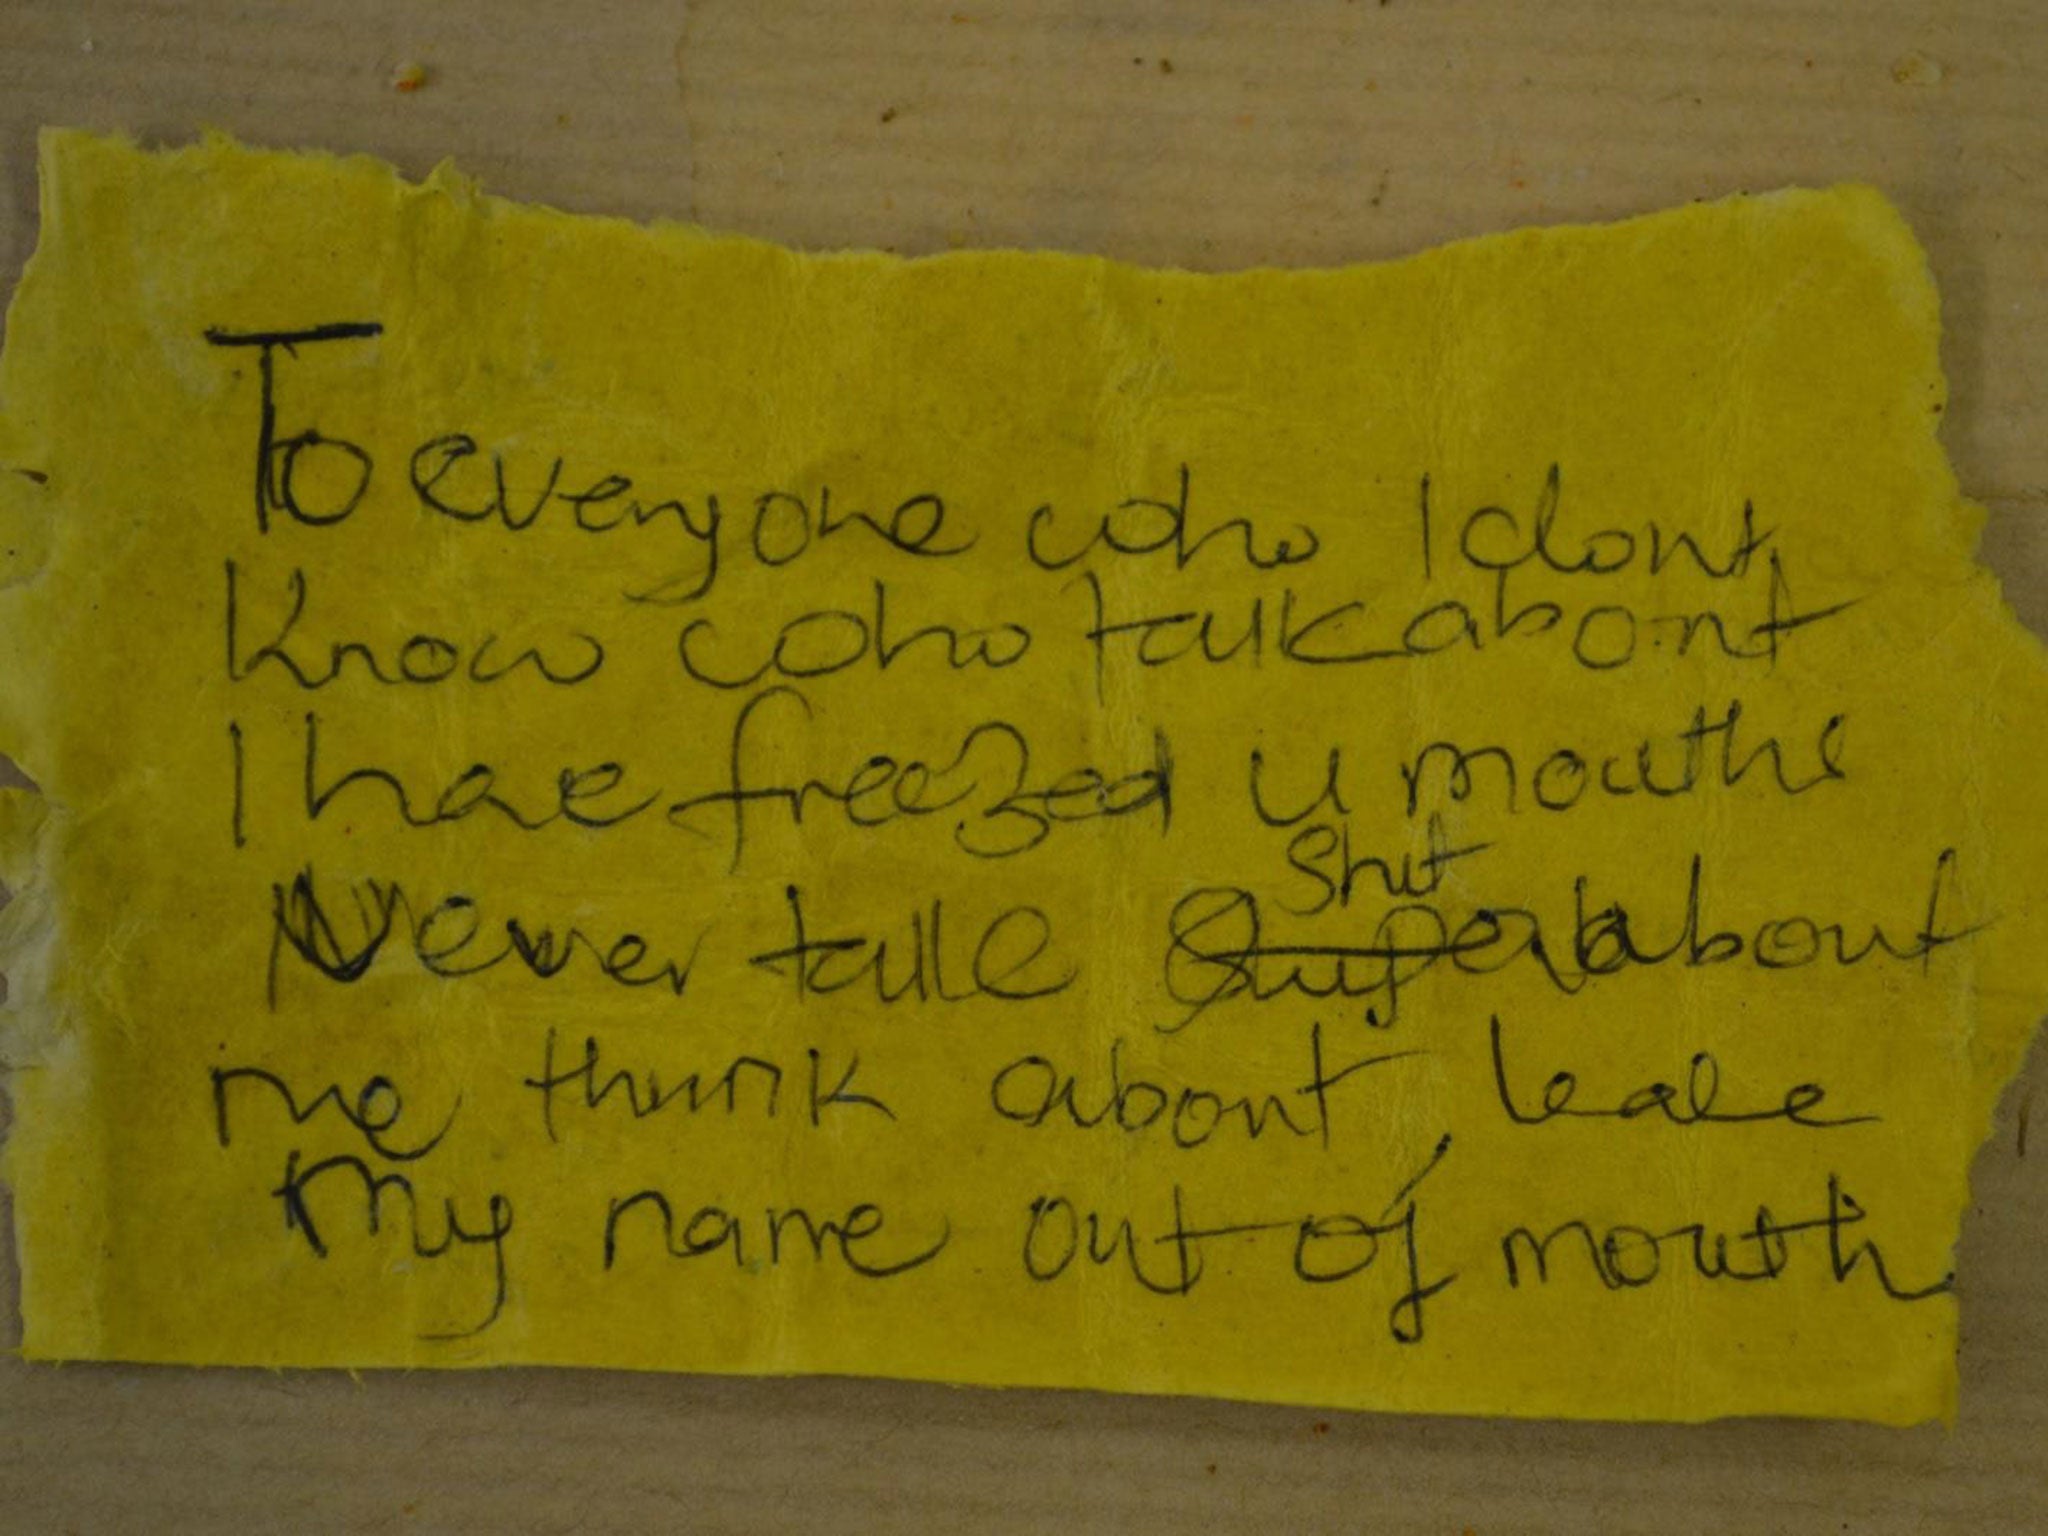 One of the notes left in a lime by the girl's mother as an attempted spell